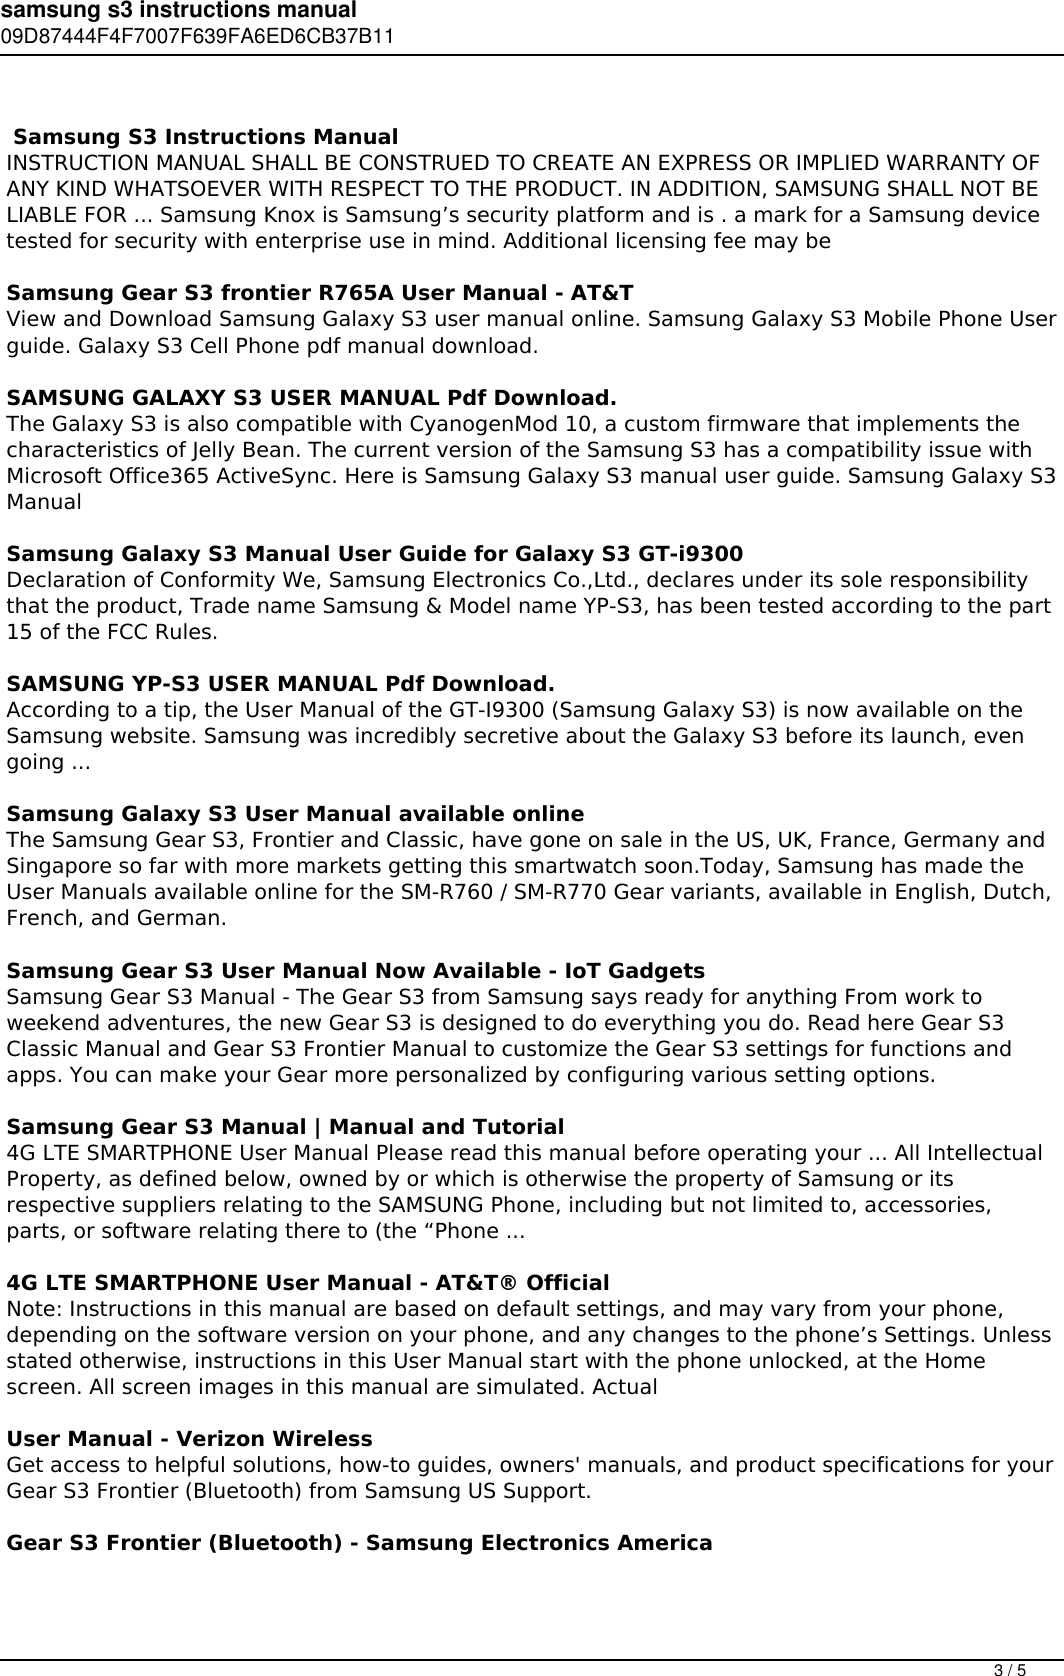 Page 3 of 5 - Samsung S3 Instructions Manual